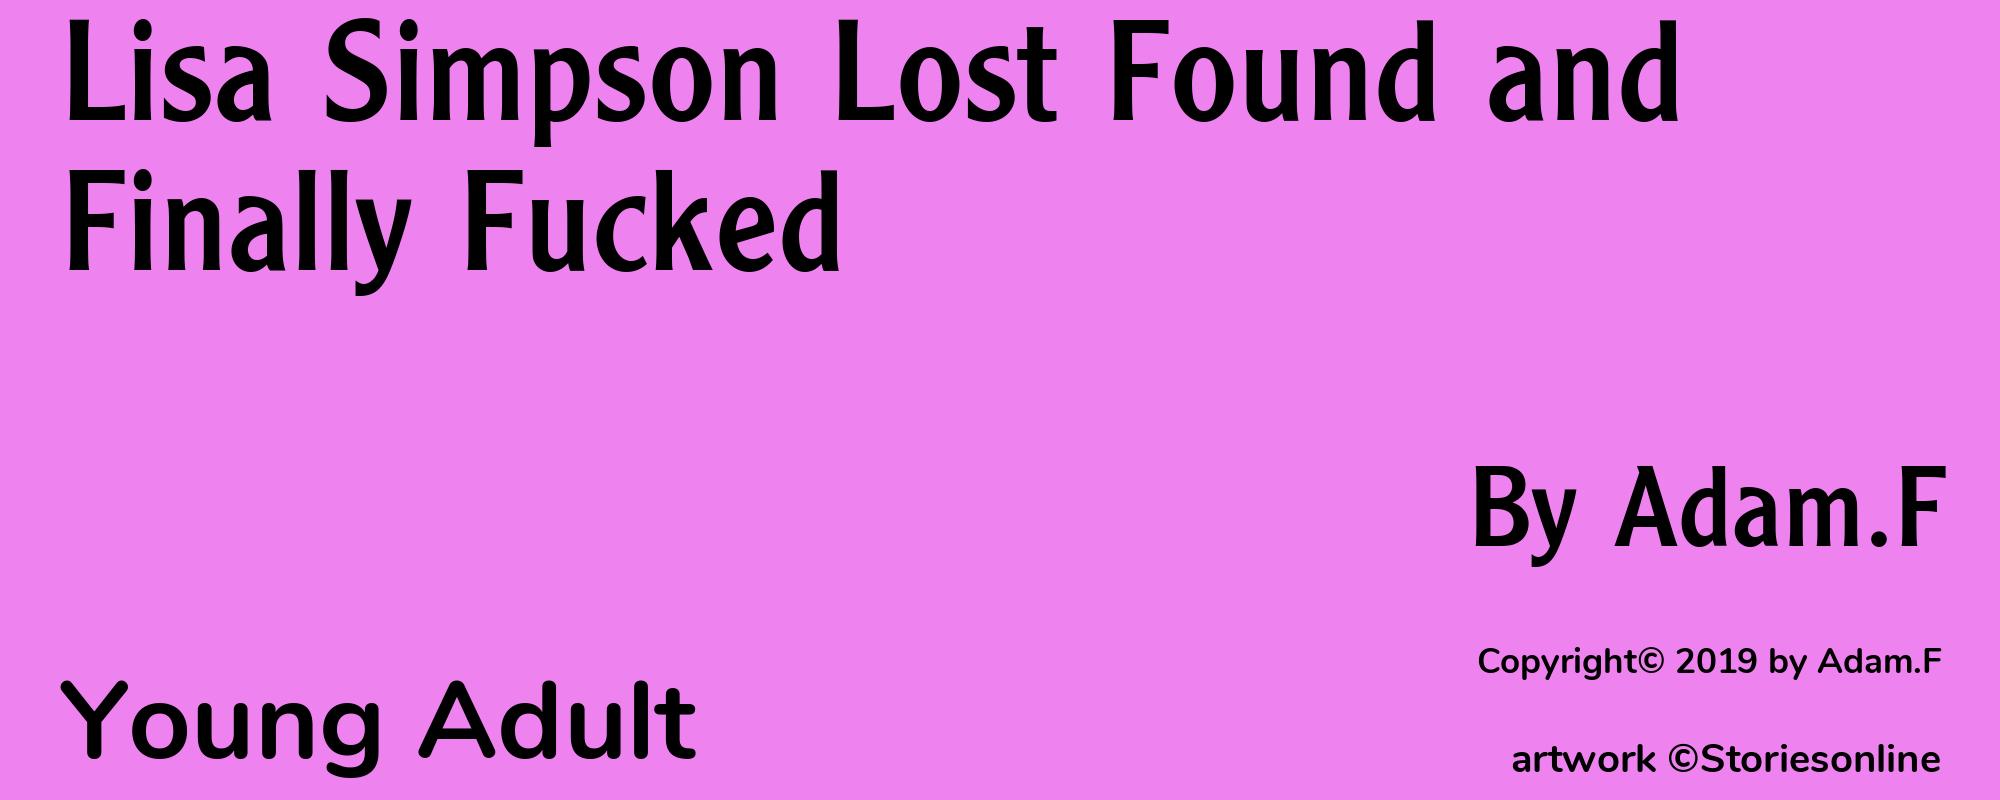 Lisa Simpson Lost Found and Finally Fucked - Cover